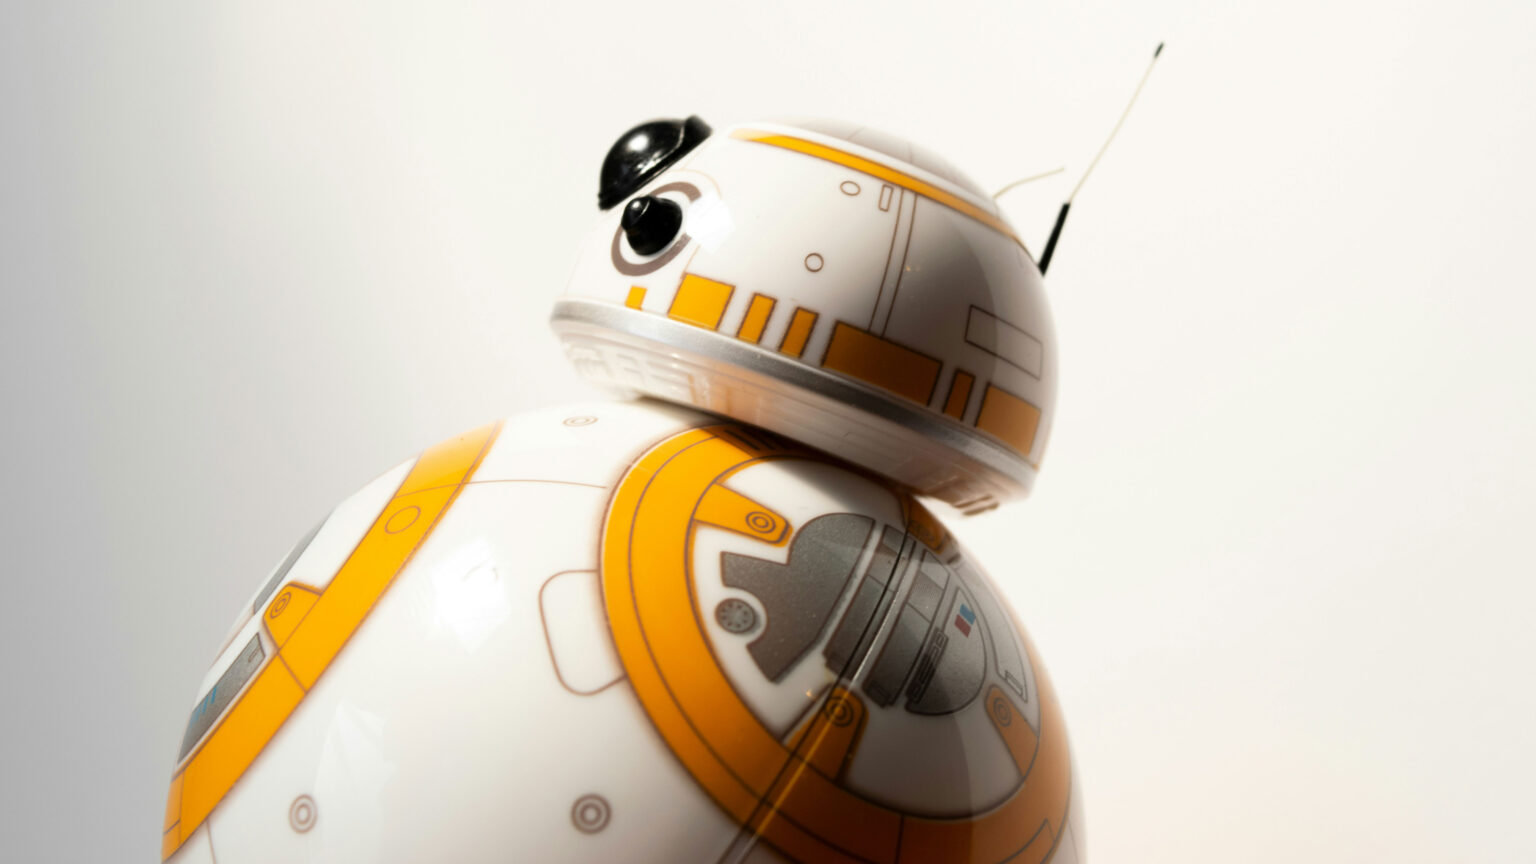 Image of BB-8, a robot with a dome-shaped head and spherical body colored white with orange and silver geometric accents, seen in Star Wars films.